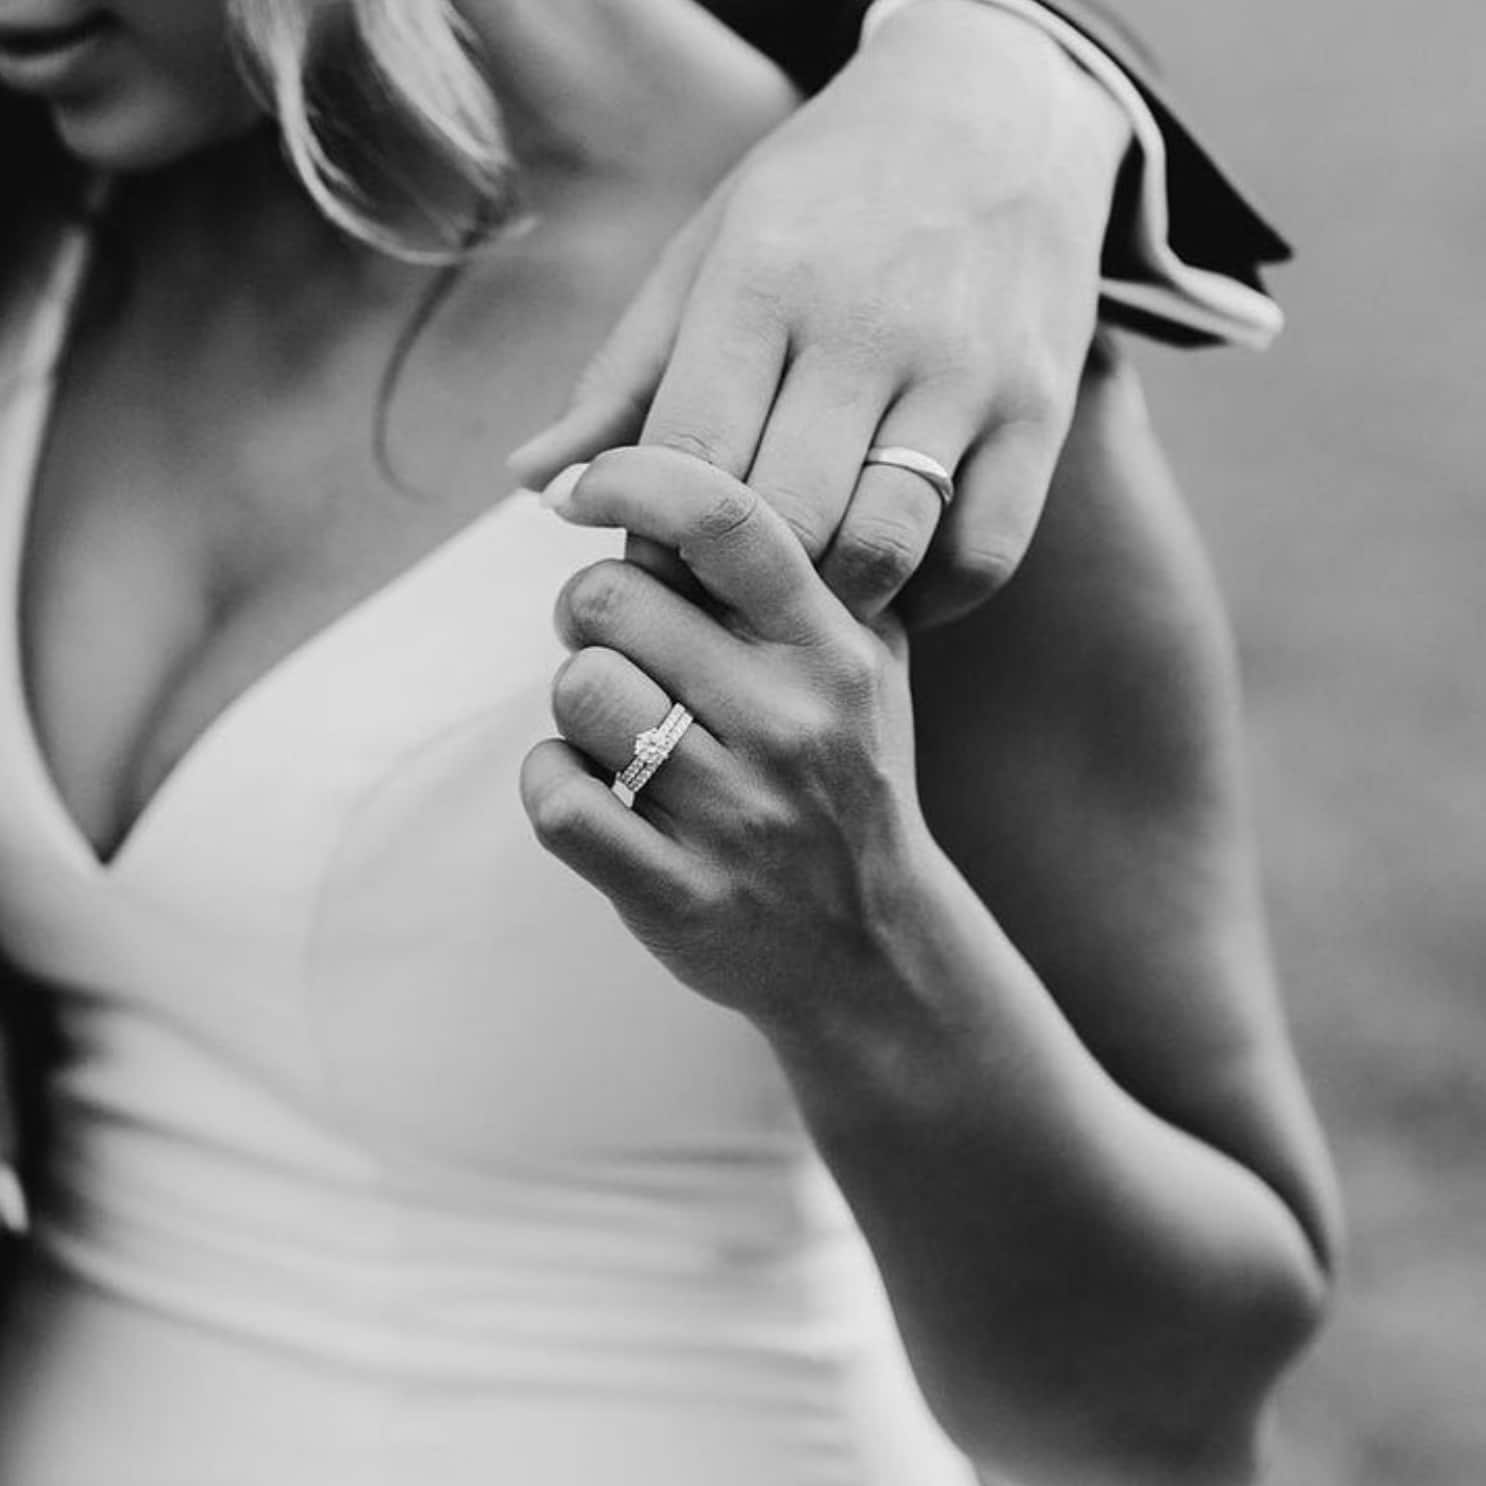 Your Engagement Ring Finger: Which One is It? - Larsen Jewellery